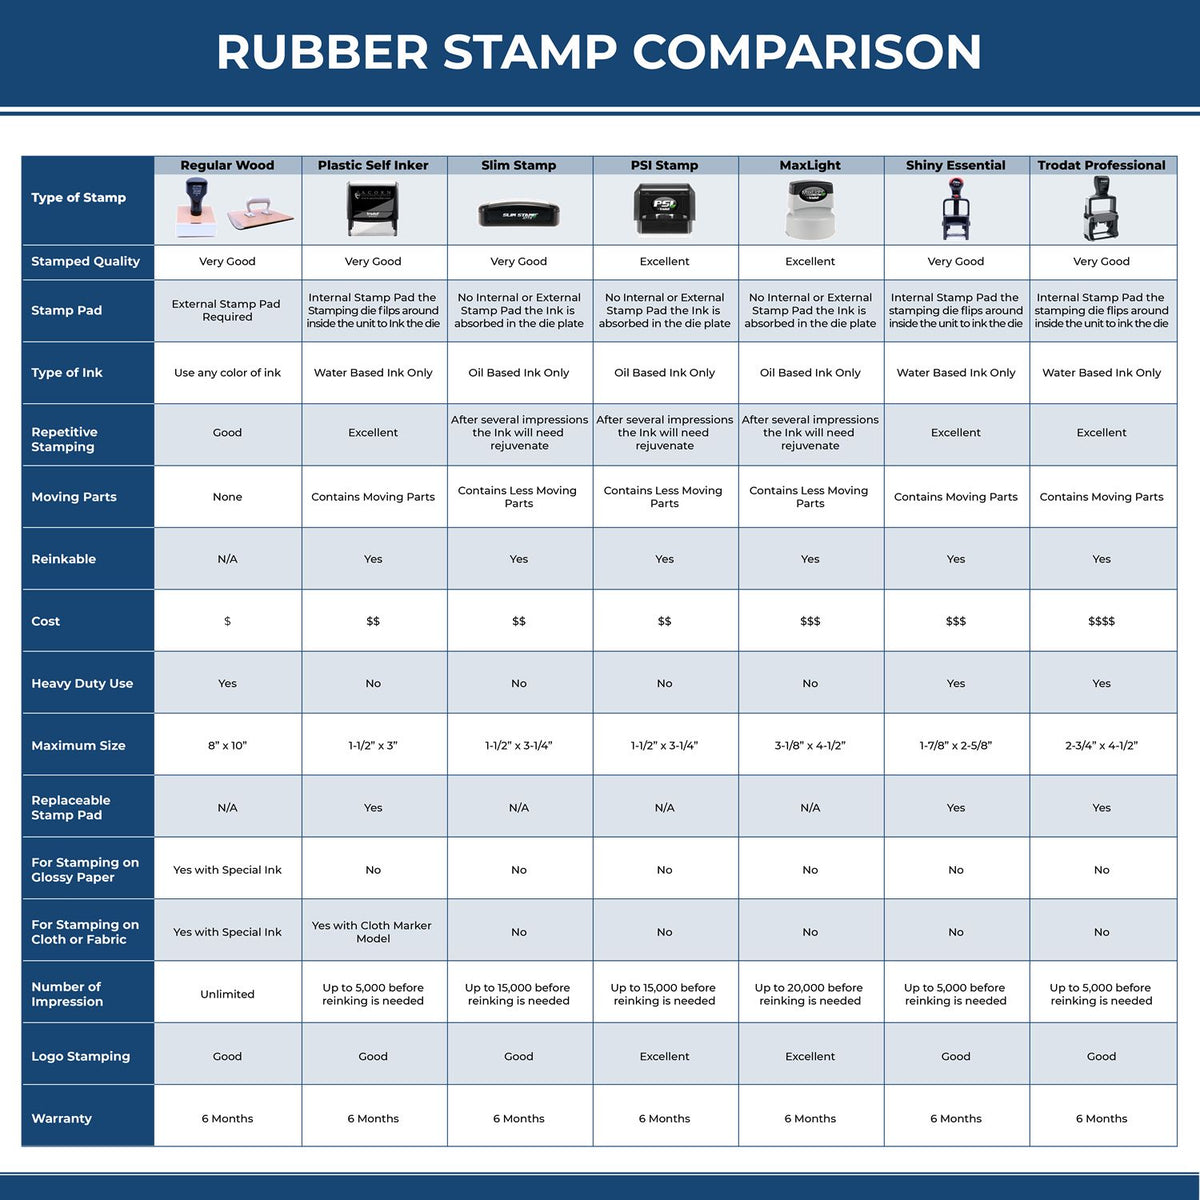 Large Self Inking Returned Not Paid Stamp 4586S Rubber Stamp Comparison